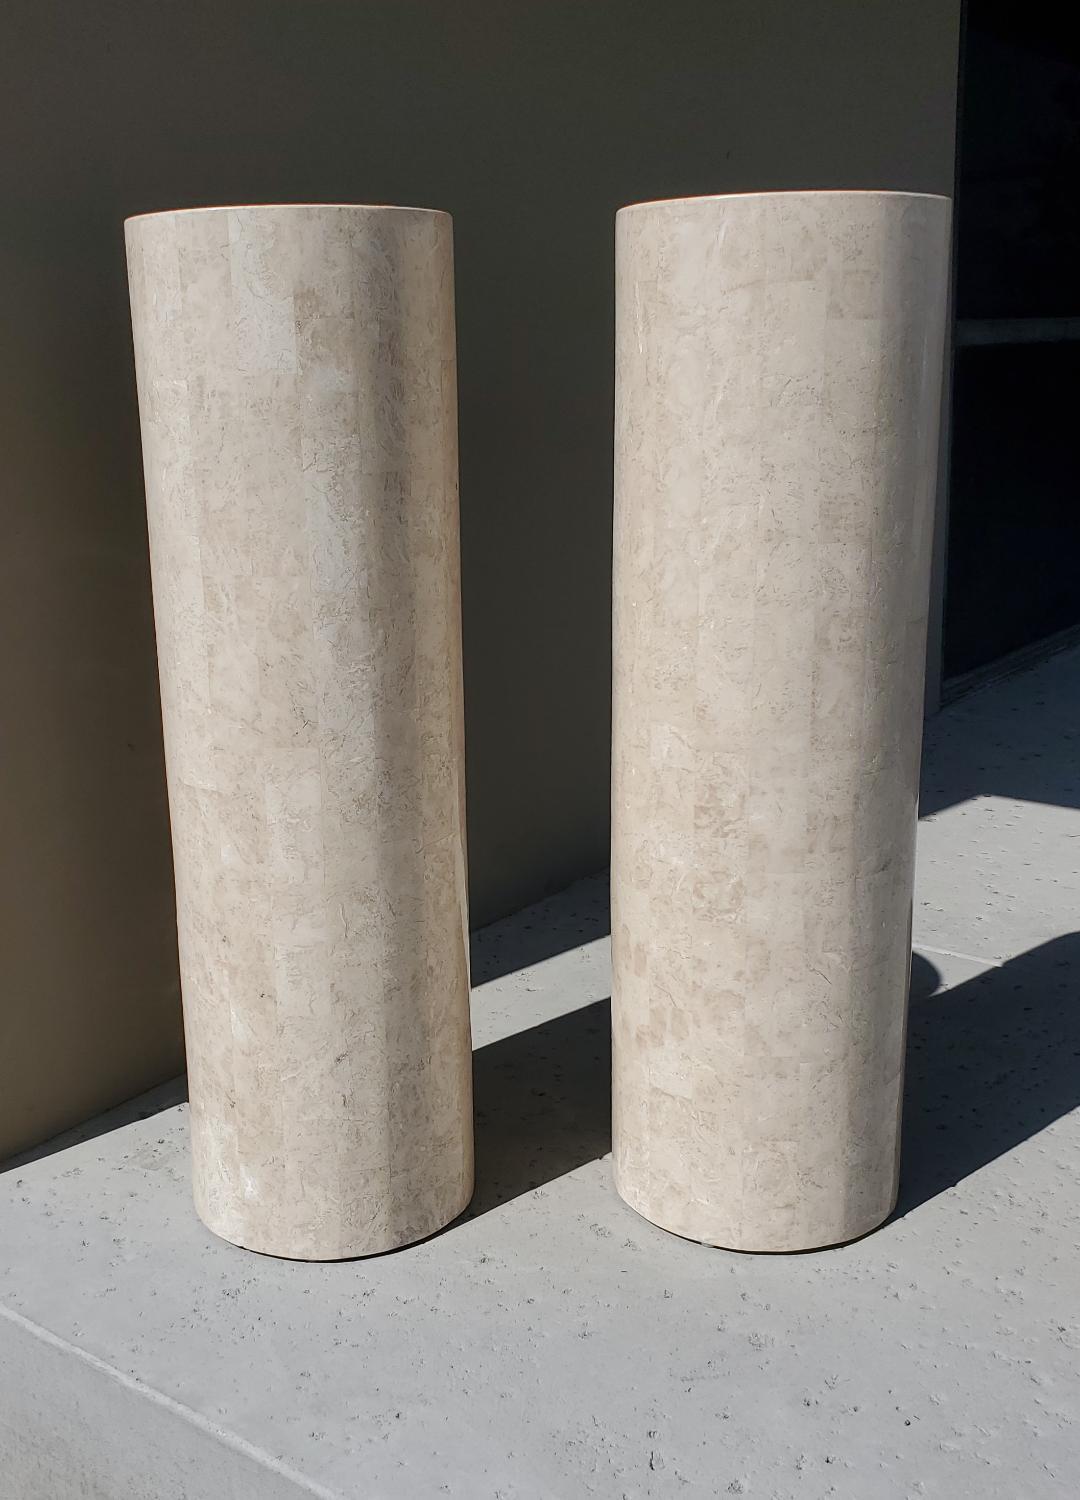 Marquis Collection of Beverly Hills, 1980s Round Tessellated Stone Pedestals 2 11